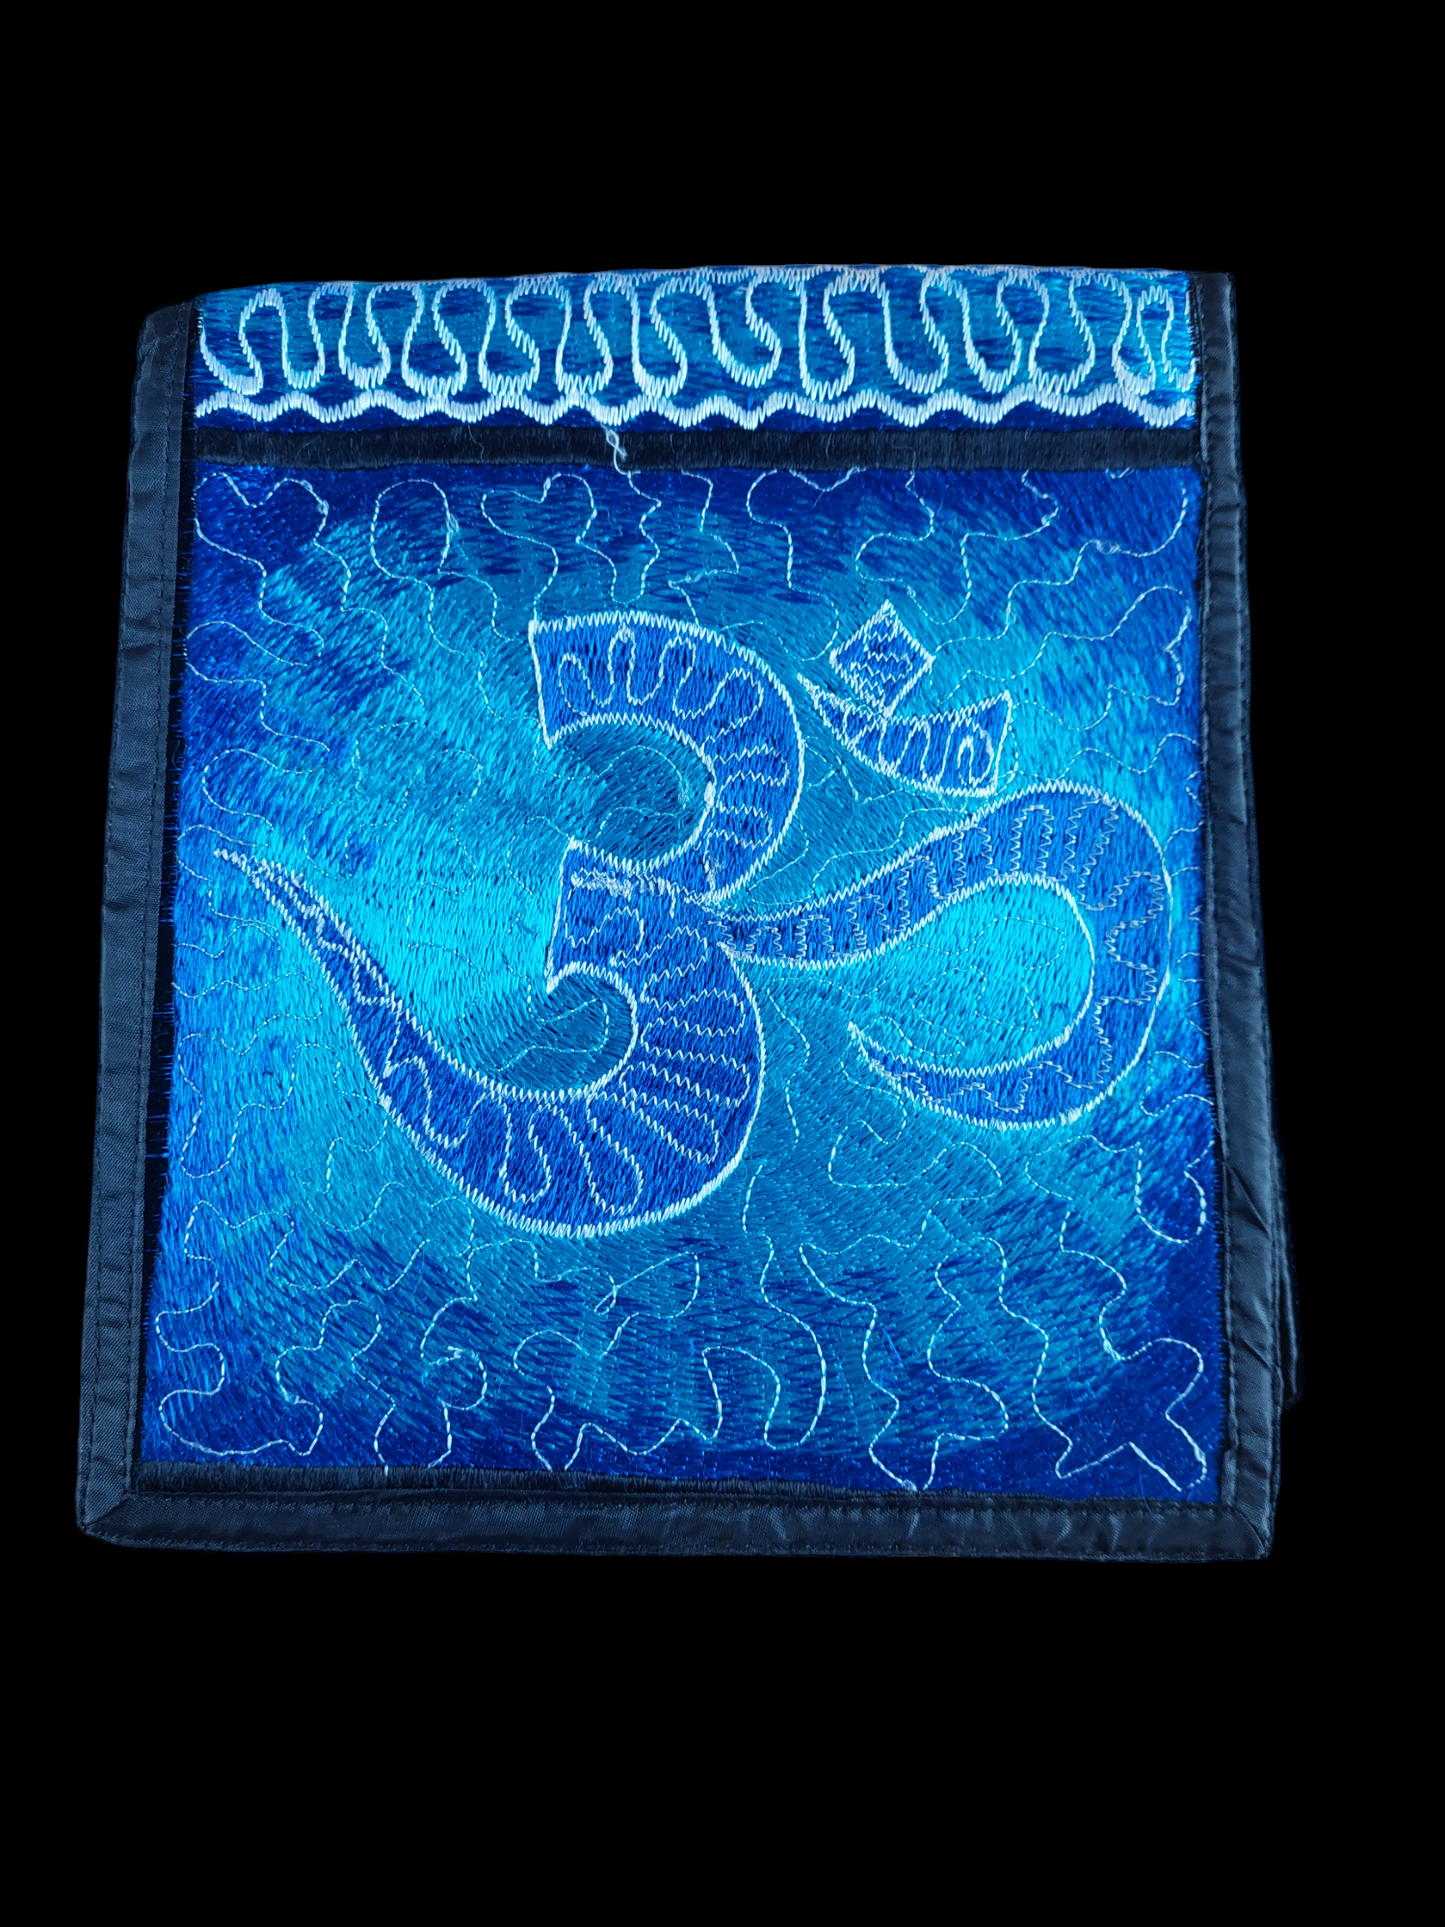 Nepalese bags with Aum symbol